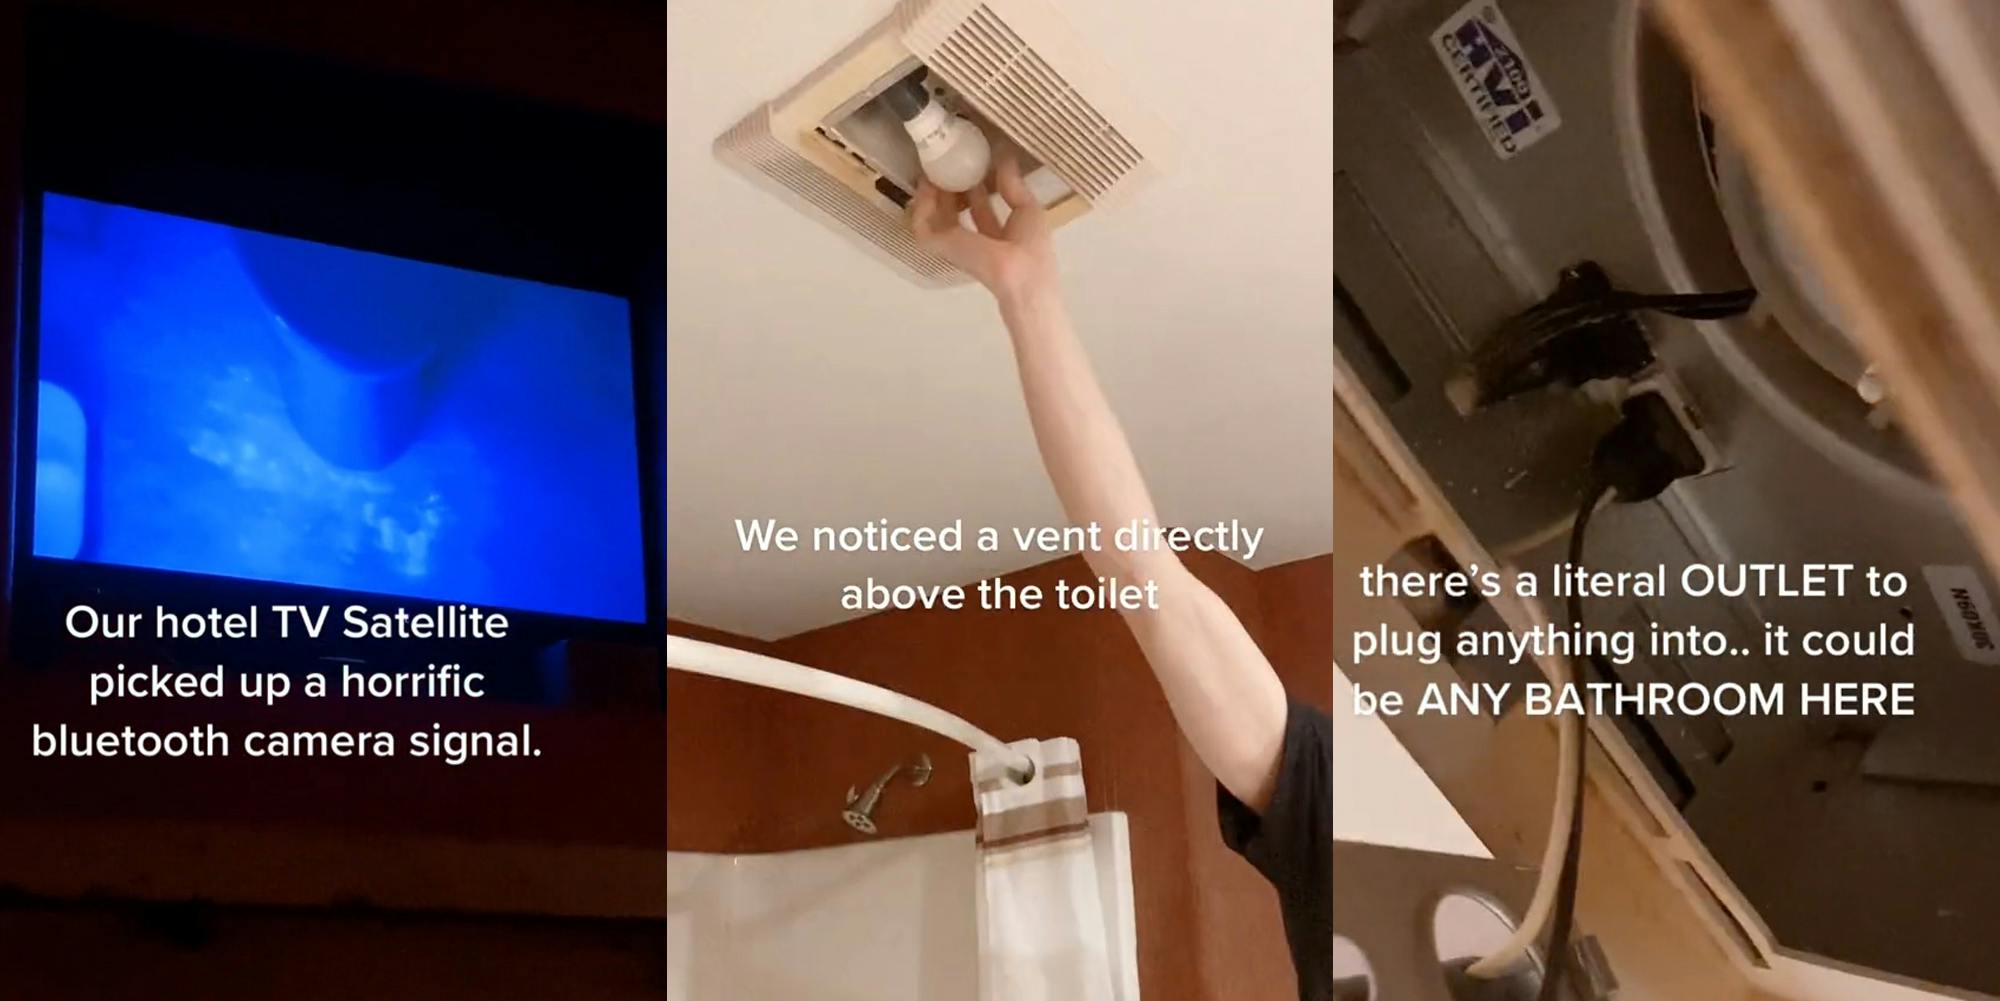 hotel tv with hidden camera footage on screen caption "Our hotel TV Satellite picked up a horrific bluetooth camera signal" (l) hotel bathroom ceiling vent caption "We noticed a vent directly above the toilet" (c) vent with outlet inside caption "there's a literal OUTLET to plug anything into.. it could be ANY BATHROOM HERE" (r)